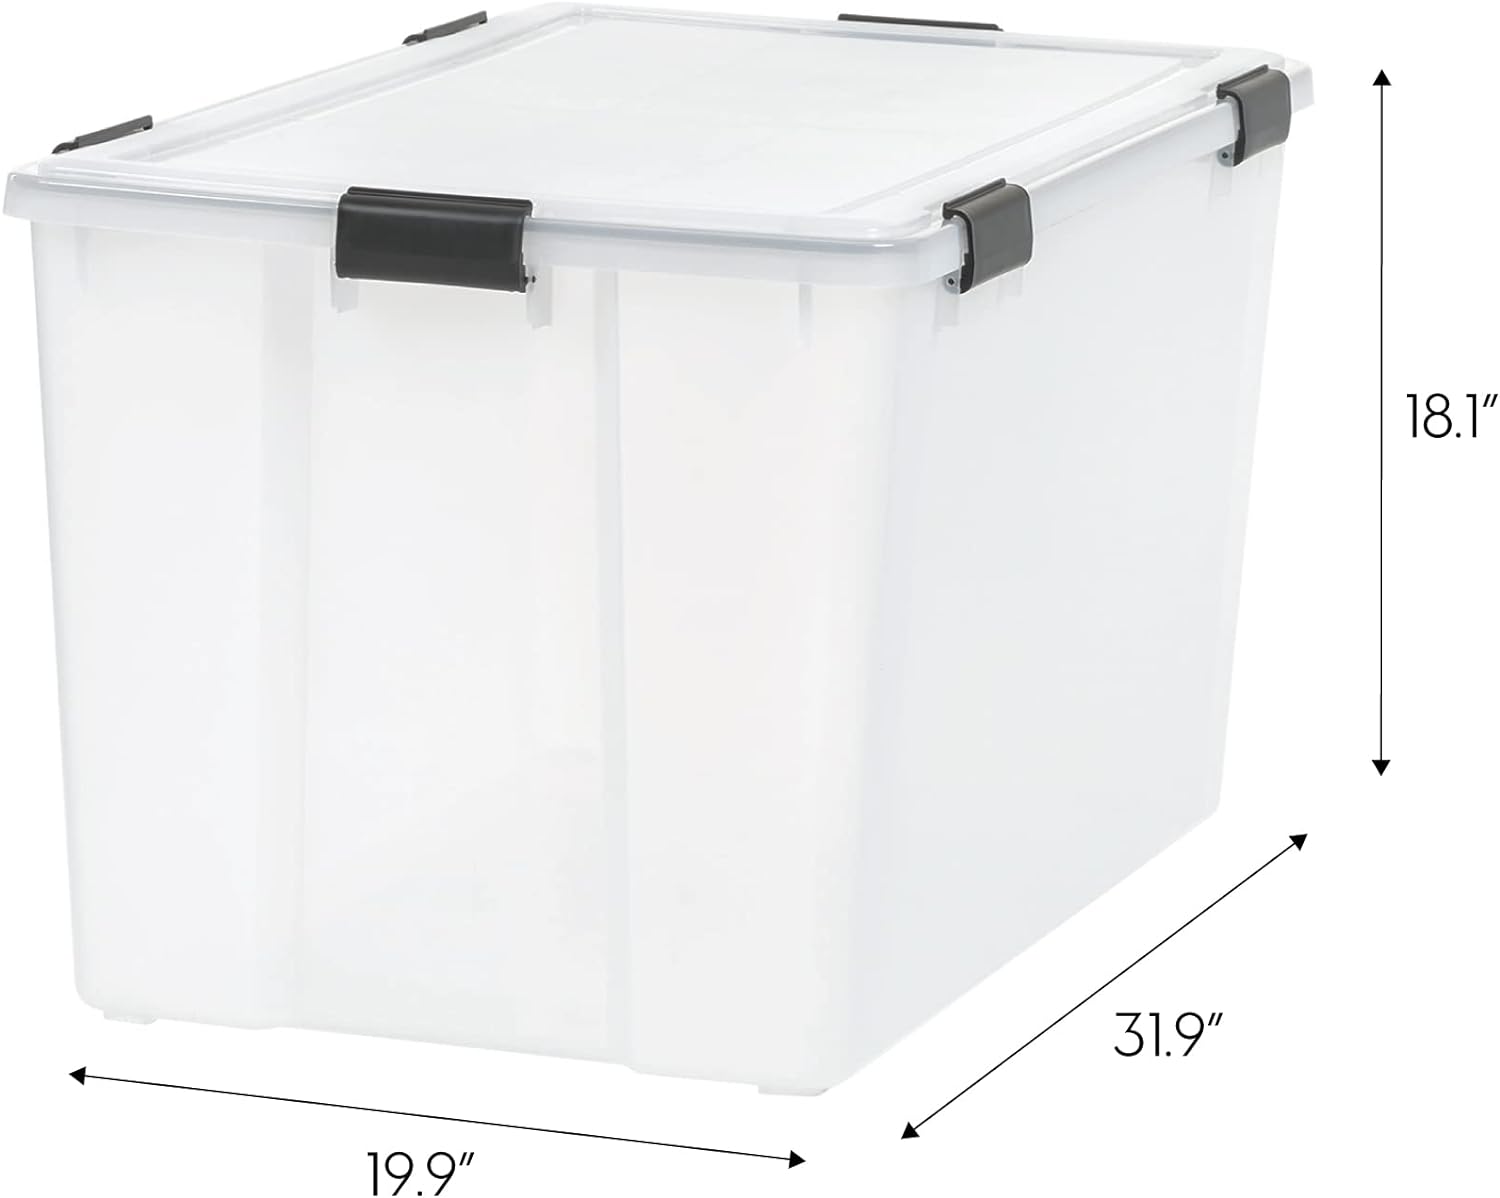 IRIS USA 70 Quart WEATHERPRO Plastic Storage Box with Durable Lid and Seal  and Secure Latching Buckles, Clear With Blue Buckles, Weathertight, 3 Pack